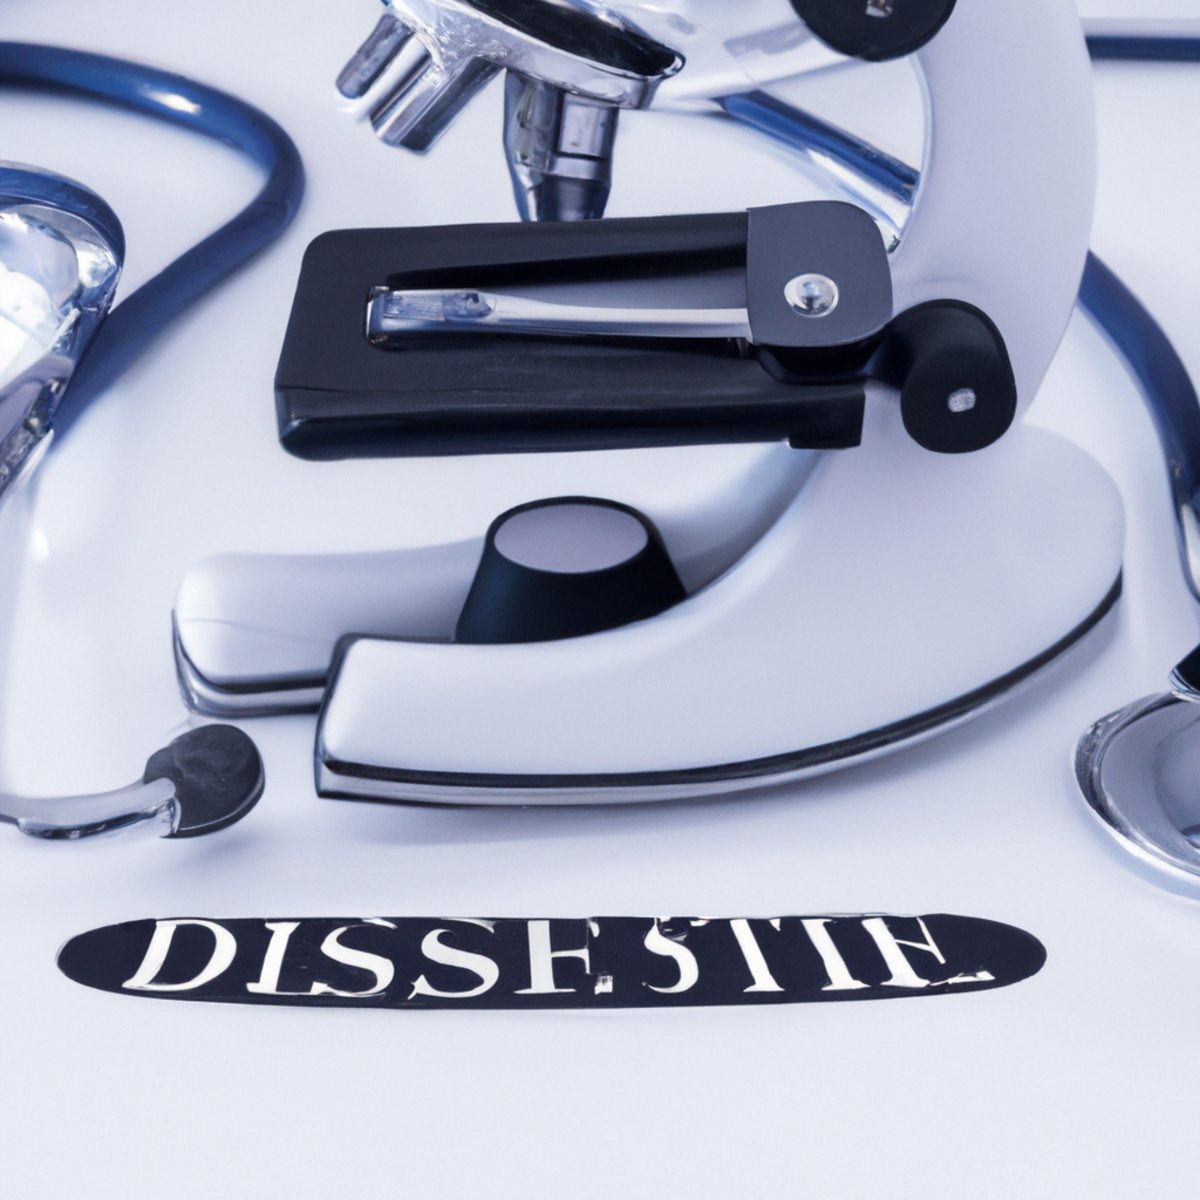 Medical equipment and tools symbolize Dent Disease diagnosis, emphasizing the role of physicians and meticulous examination.